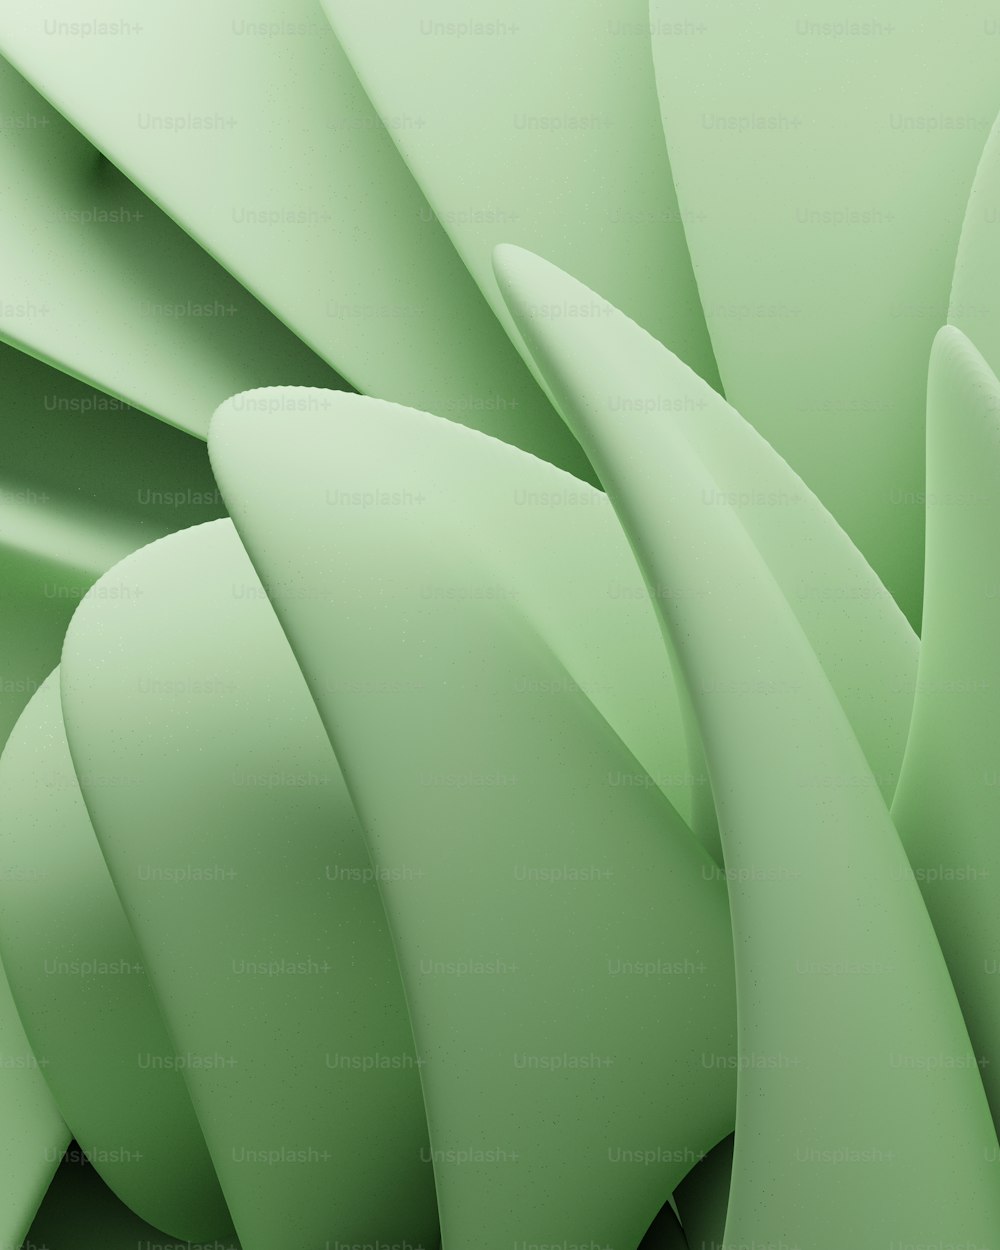 a close up view of a green object